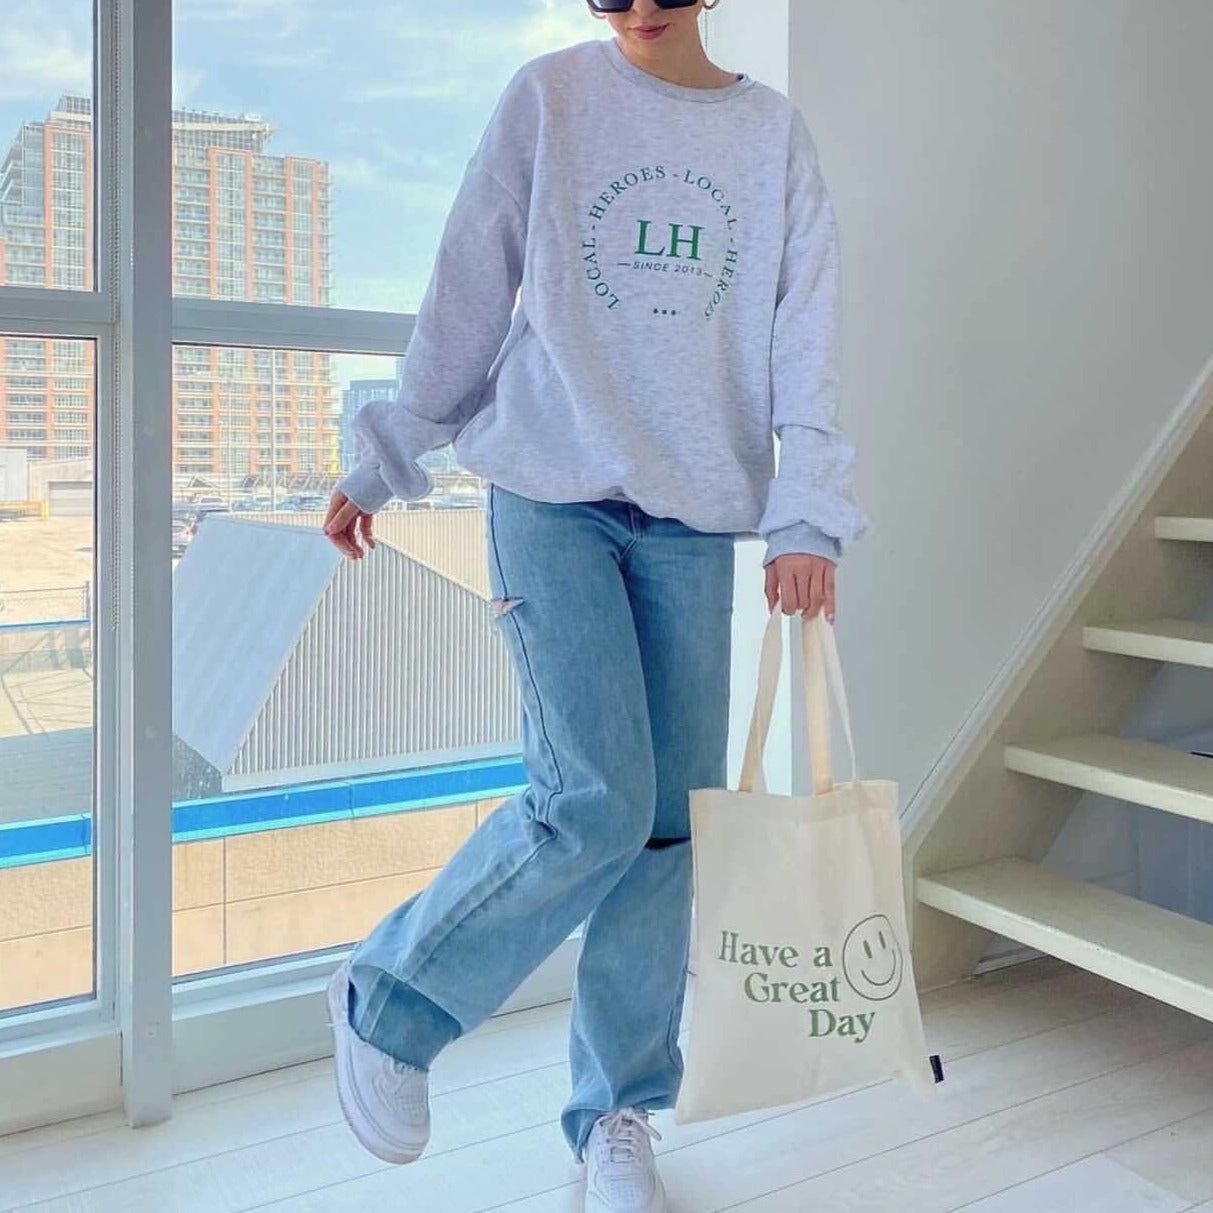 Have a Great Day Tote Bag